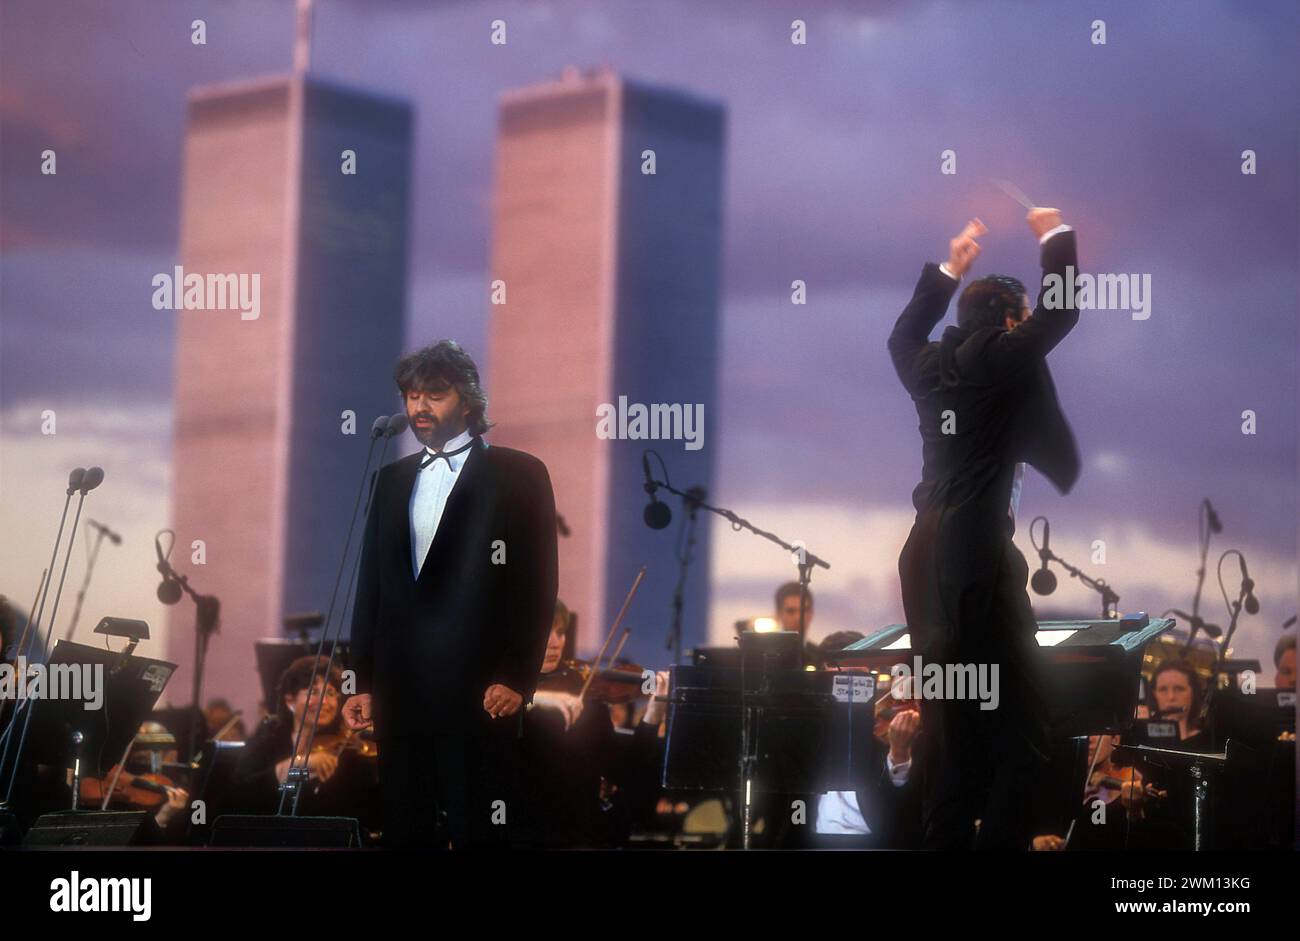 3827701 Andrea Bocelli; (add.info.: Concert (in honor of all Italian immigrants) of Andrea Bocelli and the New Jersey Simphony Orchestra with the Twin Towers in background. Conductor Steven Mercurio. Liberty State Park, New York, 6th July 2000 / Concerto di Andrea Bocelli a Liberty State Park. New Jersey Simphony Orchestra diretta da Steven Mercurio. Sullo sfondo le Twin Towers. New York, 6 luglio 2000); © Marcello Mencarini. All rights reserved 2024. Stock Photo